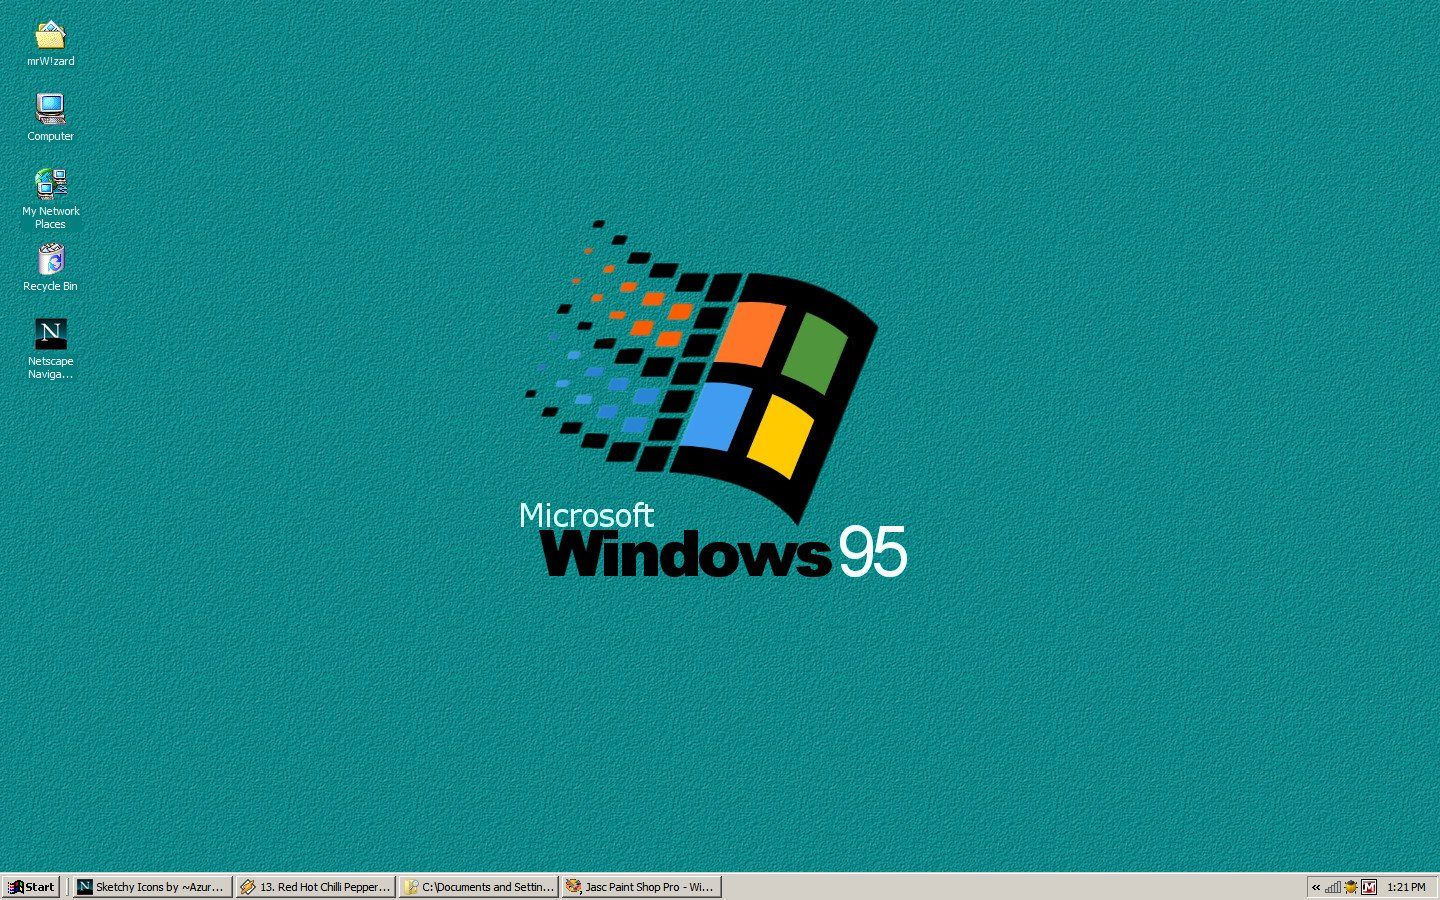 Windows 95 wallpaper with the logo on a blue background. - Windows 95